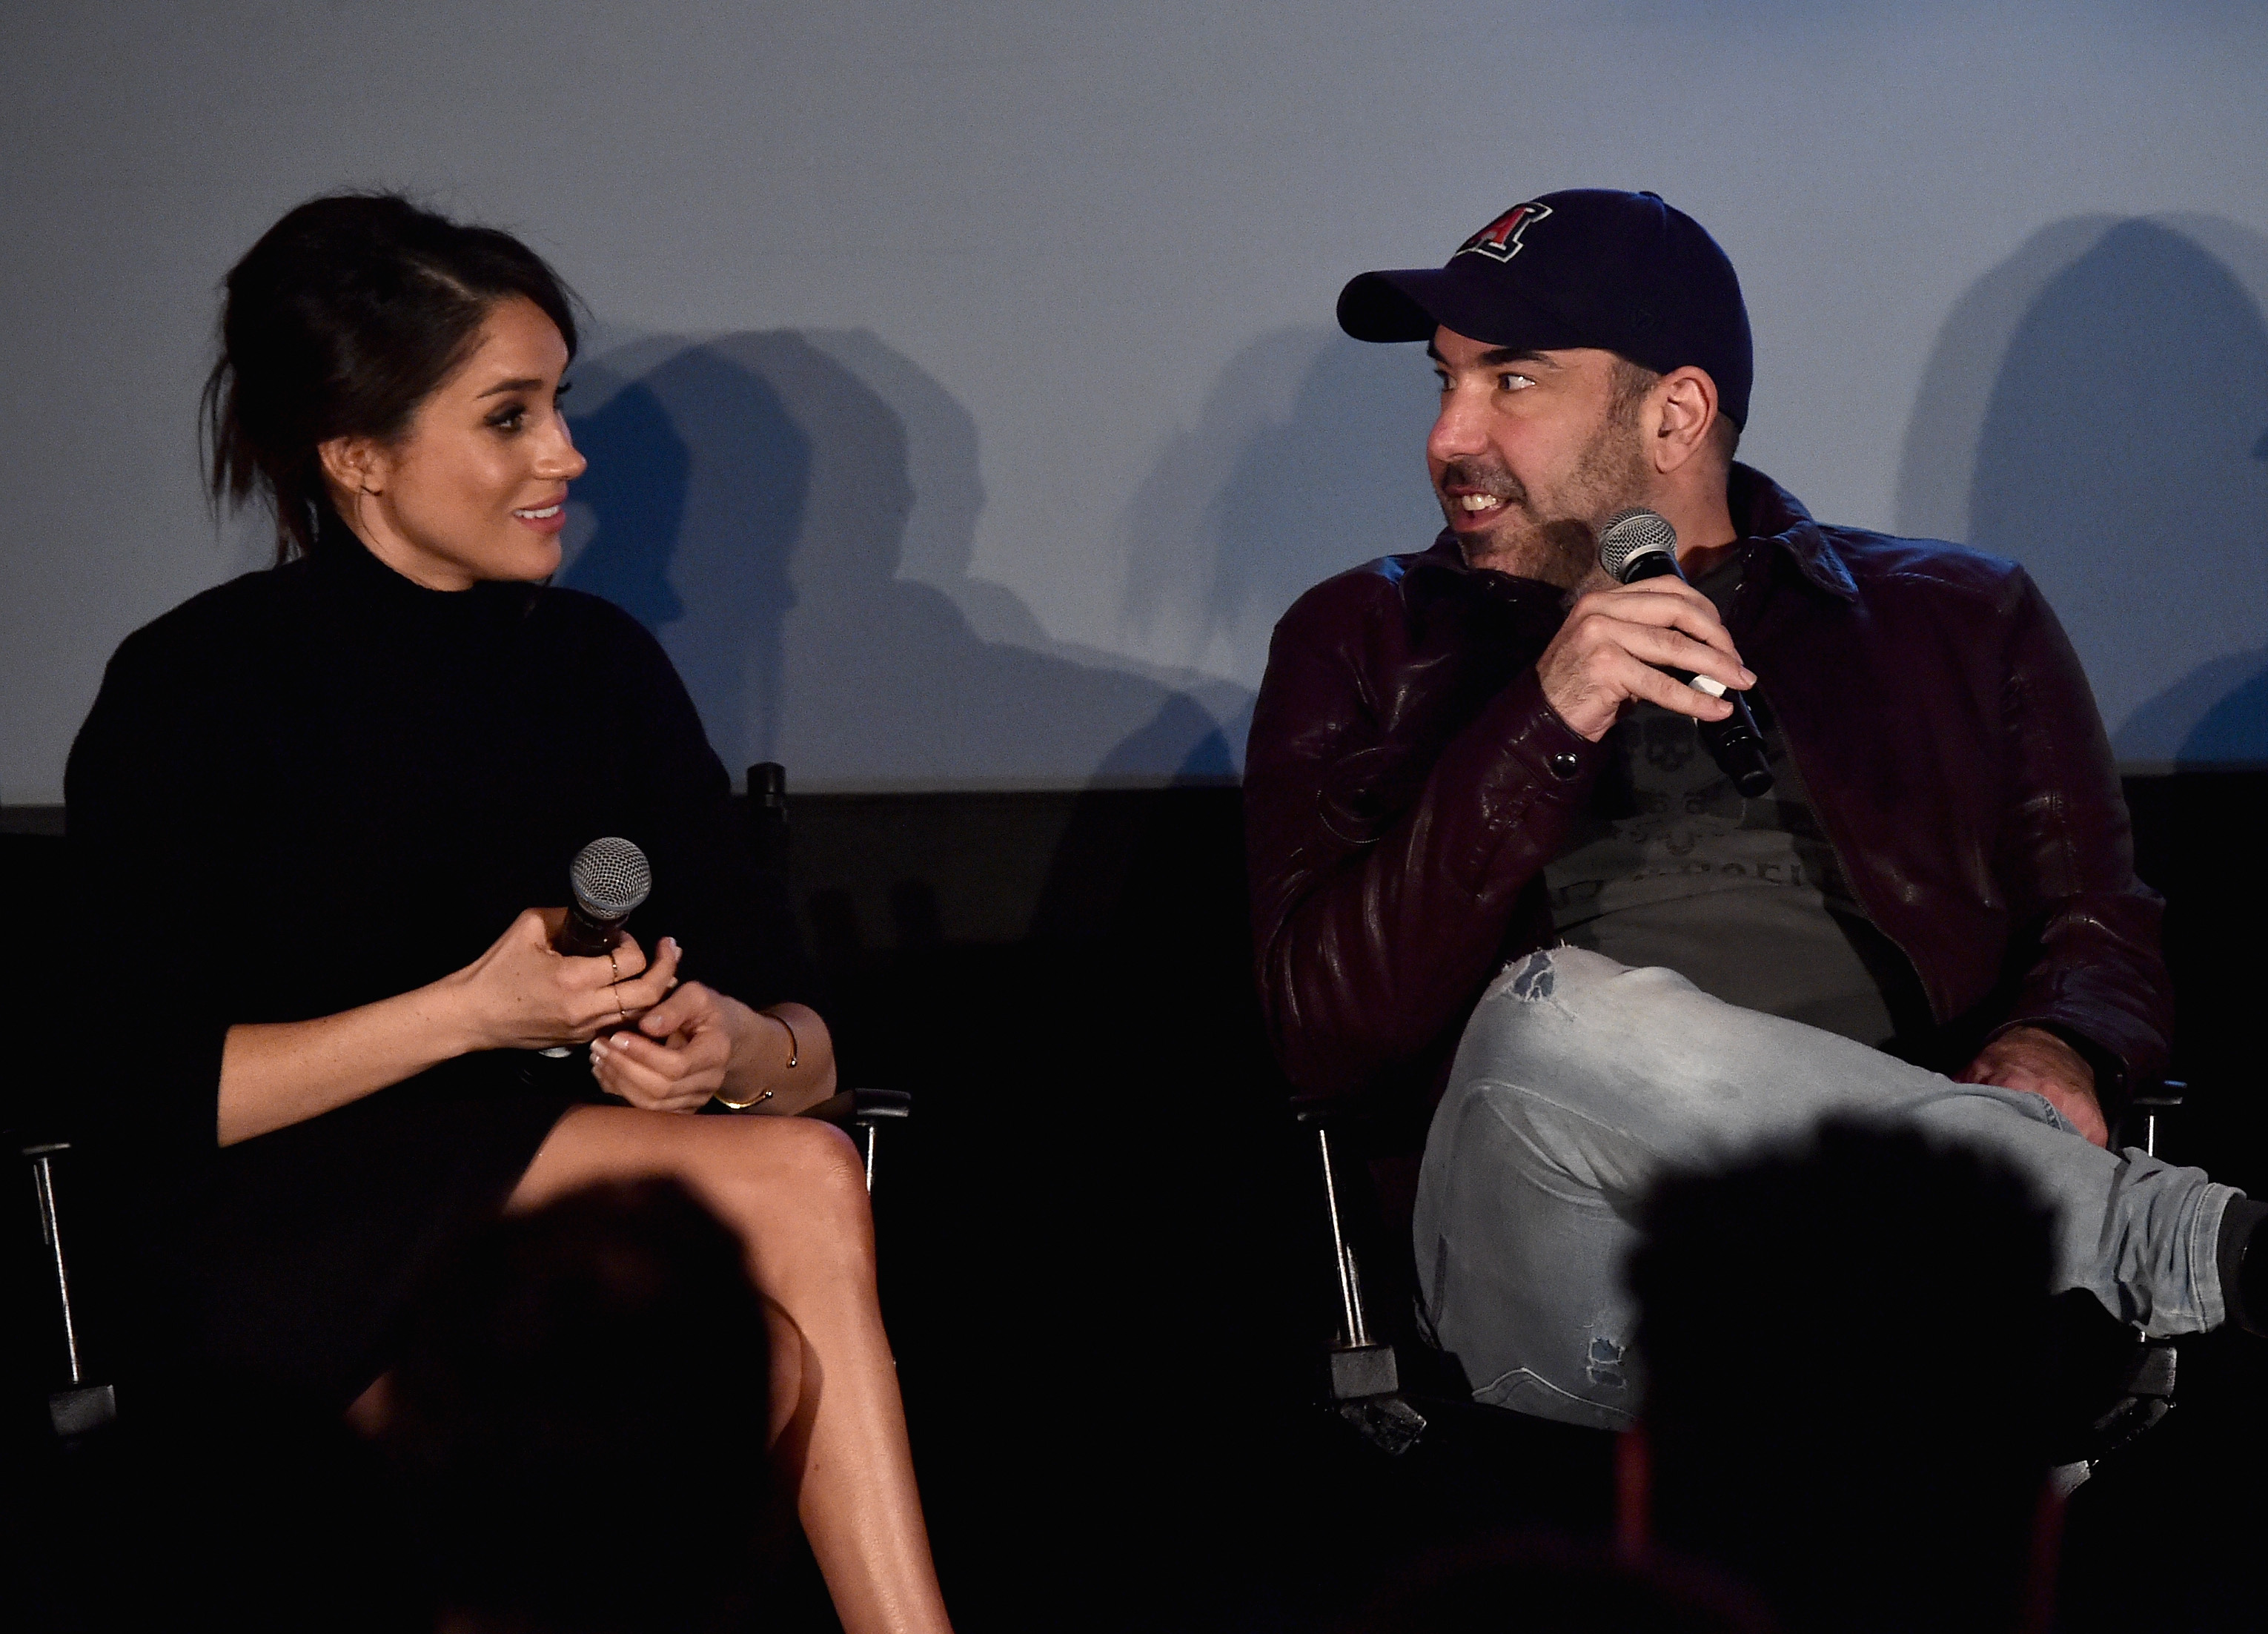 Meghan Markle and Rick Hoffman attend a Q&A following the premiere of USA Network's "Suits" Season 5 in Los Angeles, California, on January 21, 2016. | Source: Getty Images